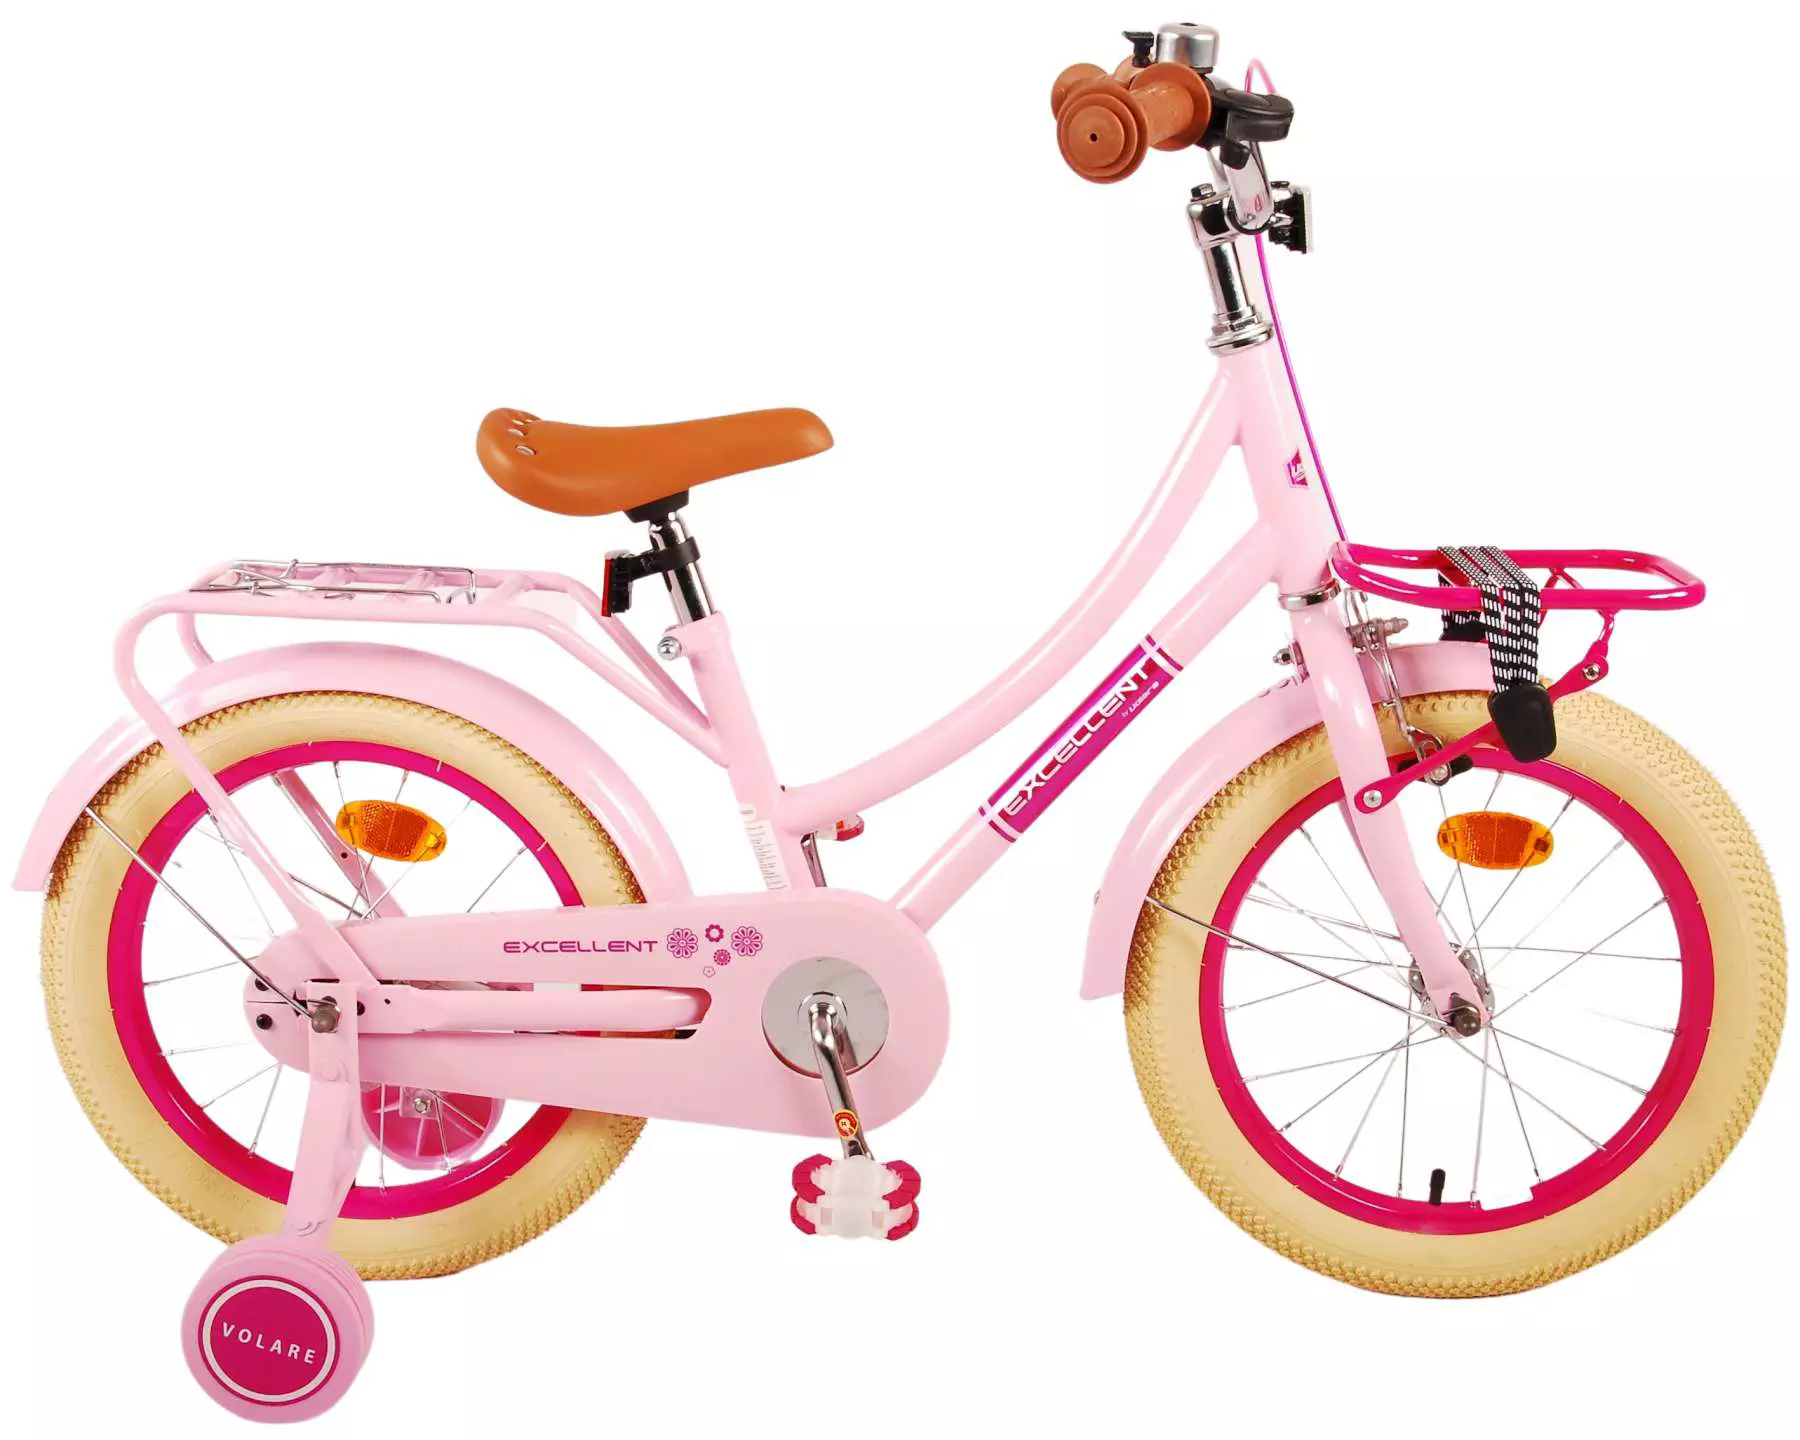 Volare Childrens Bicycle " Excellent Pink